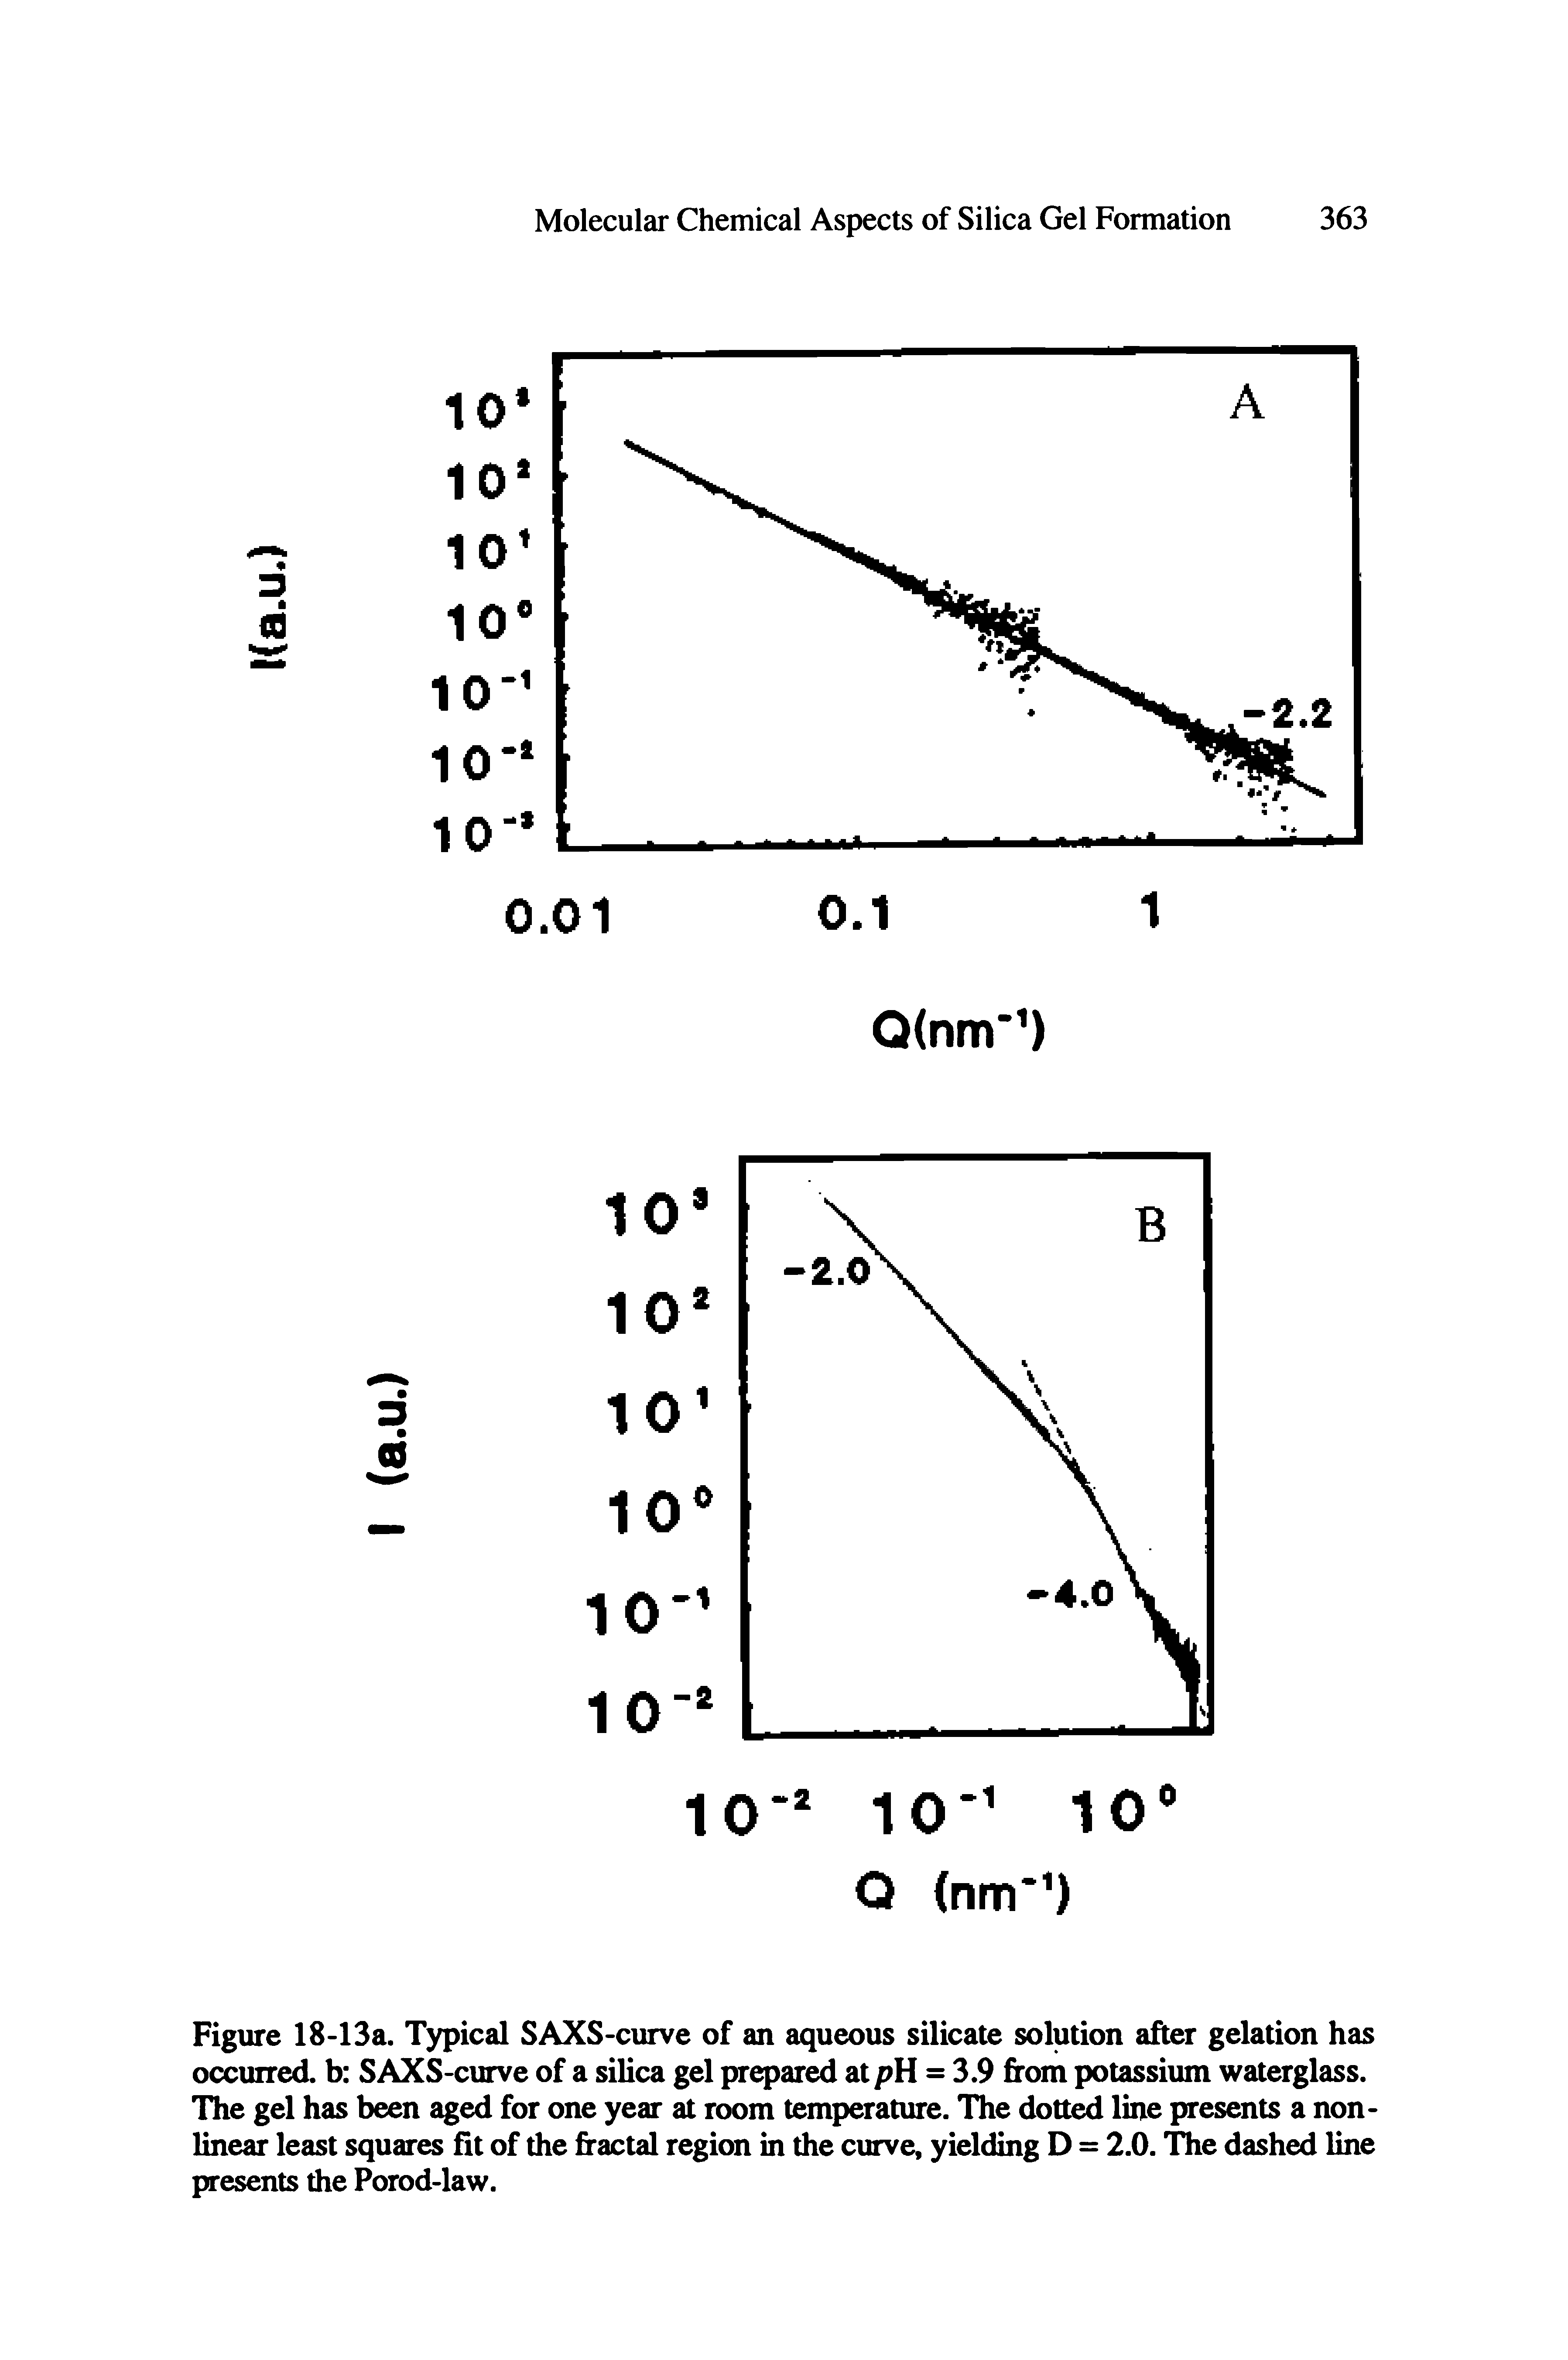 Figure 18-13a. Typical SAXS-curve of an aqueous silicate solution after gelation has occurred, b SAXS-curve of a silica gel prepared at pH = 3.9 from potassium waterglass. The gel has been aged for one year at room temperature. The dotted line presents a nonlinear least squares fit of the fractal region in the curve, yielding D = 2.0. The dashed line presents the Porod-law.